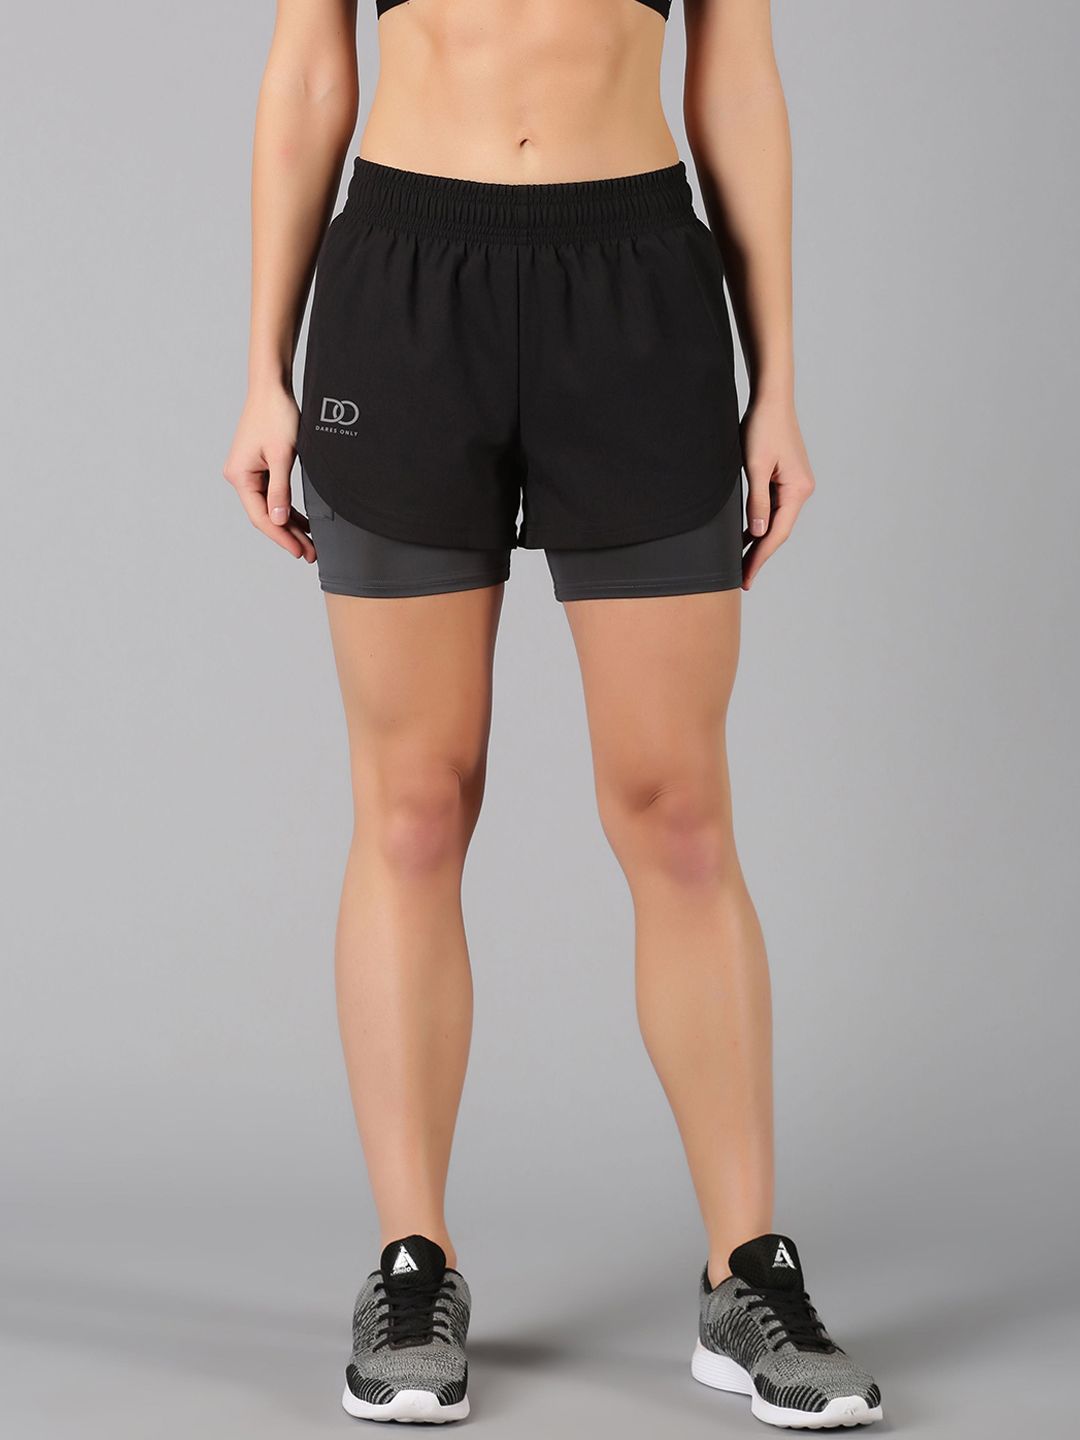 The Short Store Women Black Slim Fit High-Rise Running Sports Shorts Price in India